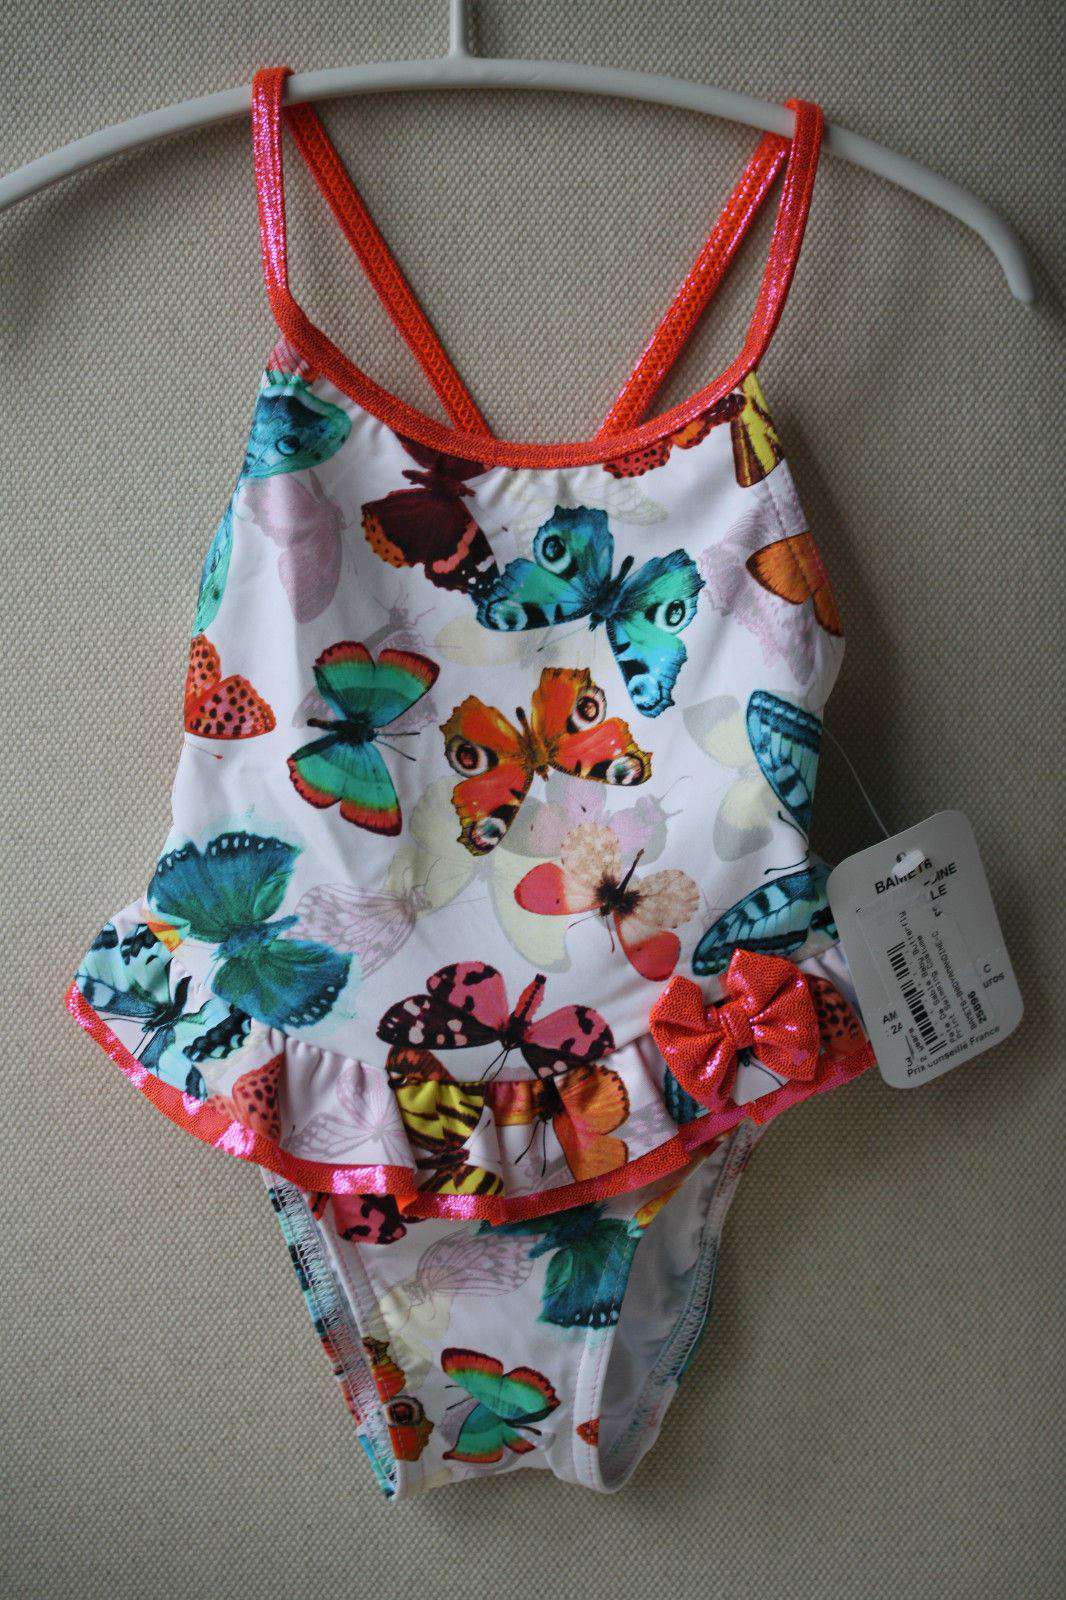 PATE DE SABLE BABY ORANGE BUTTERFLY SWIMSUIT 2 YEARS